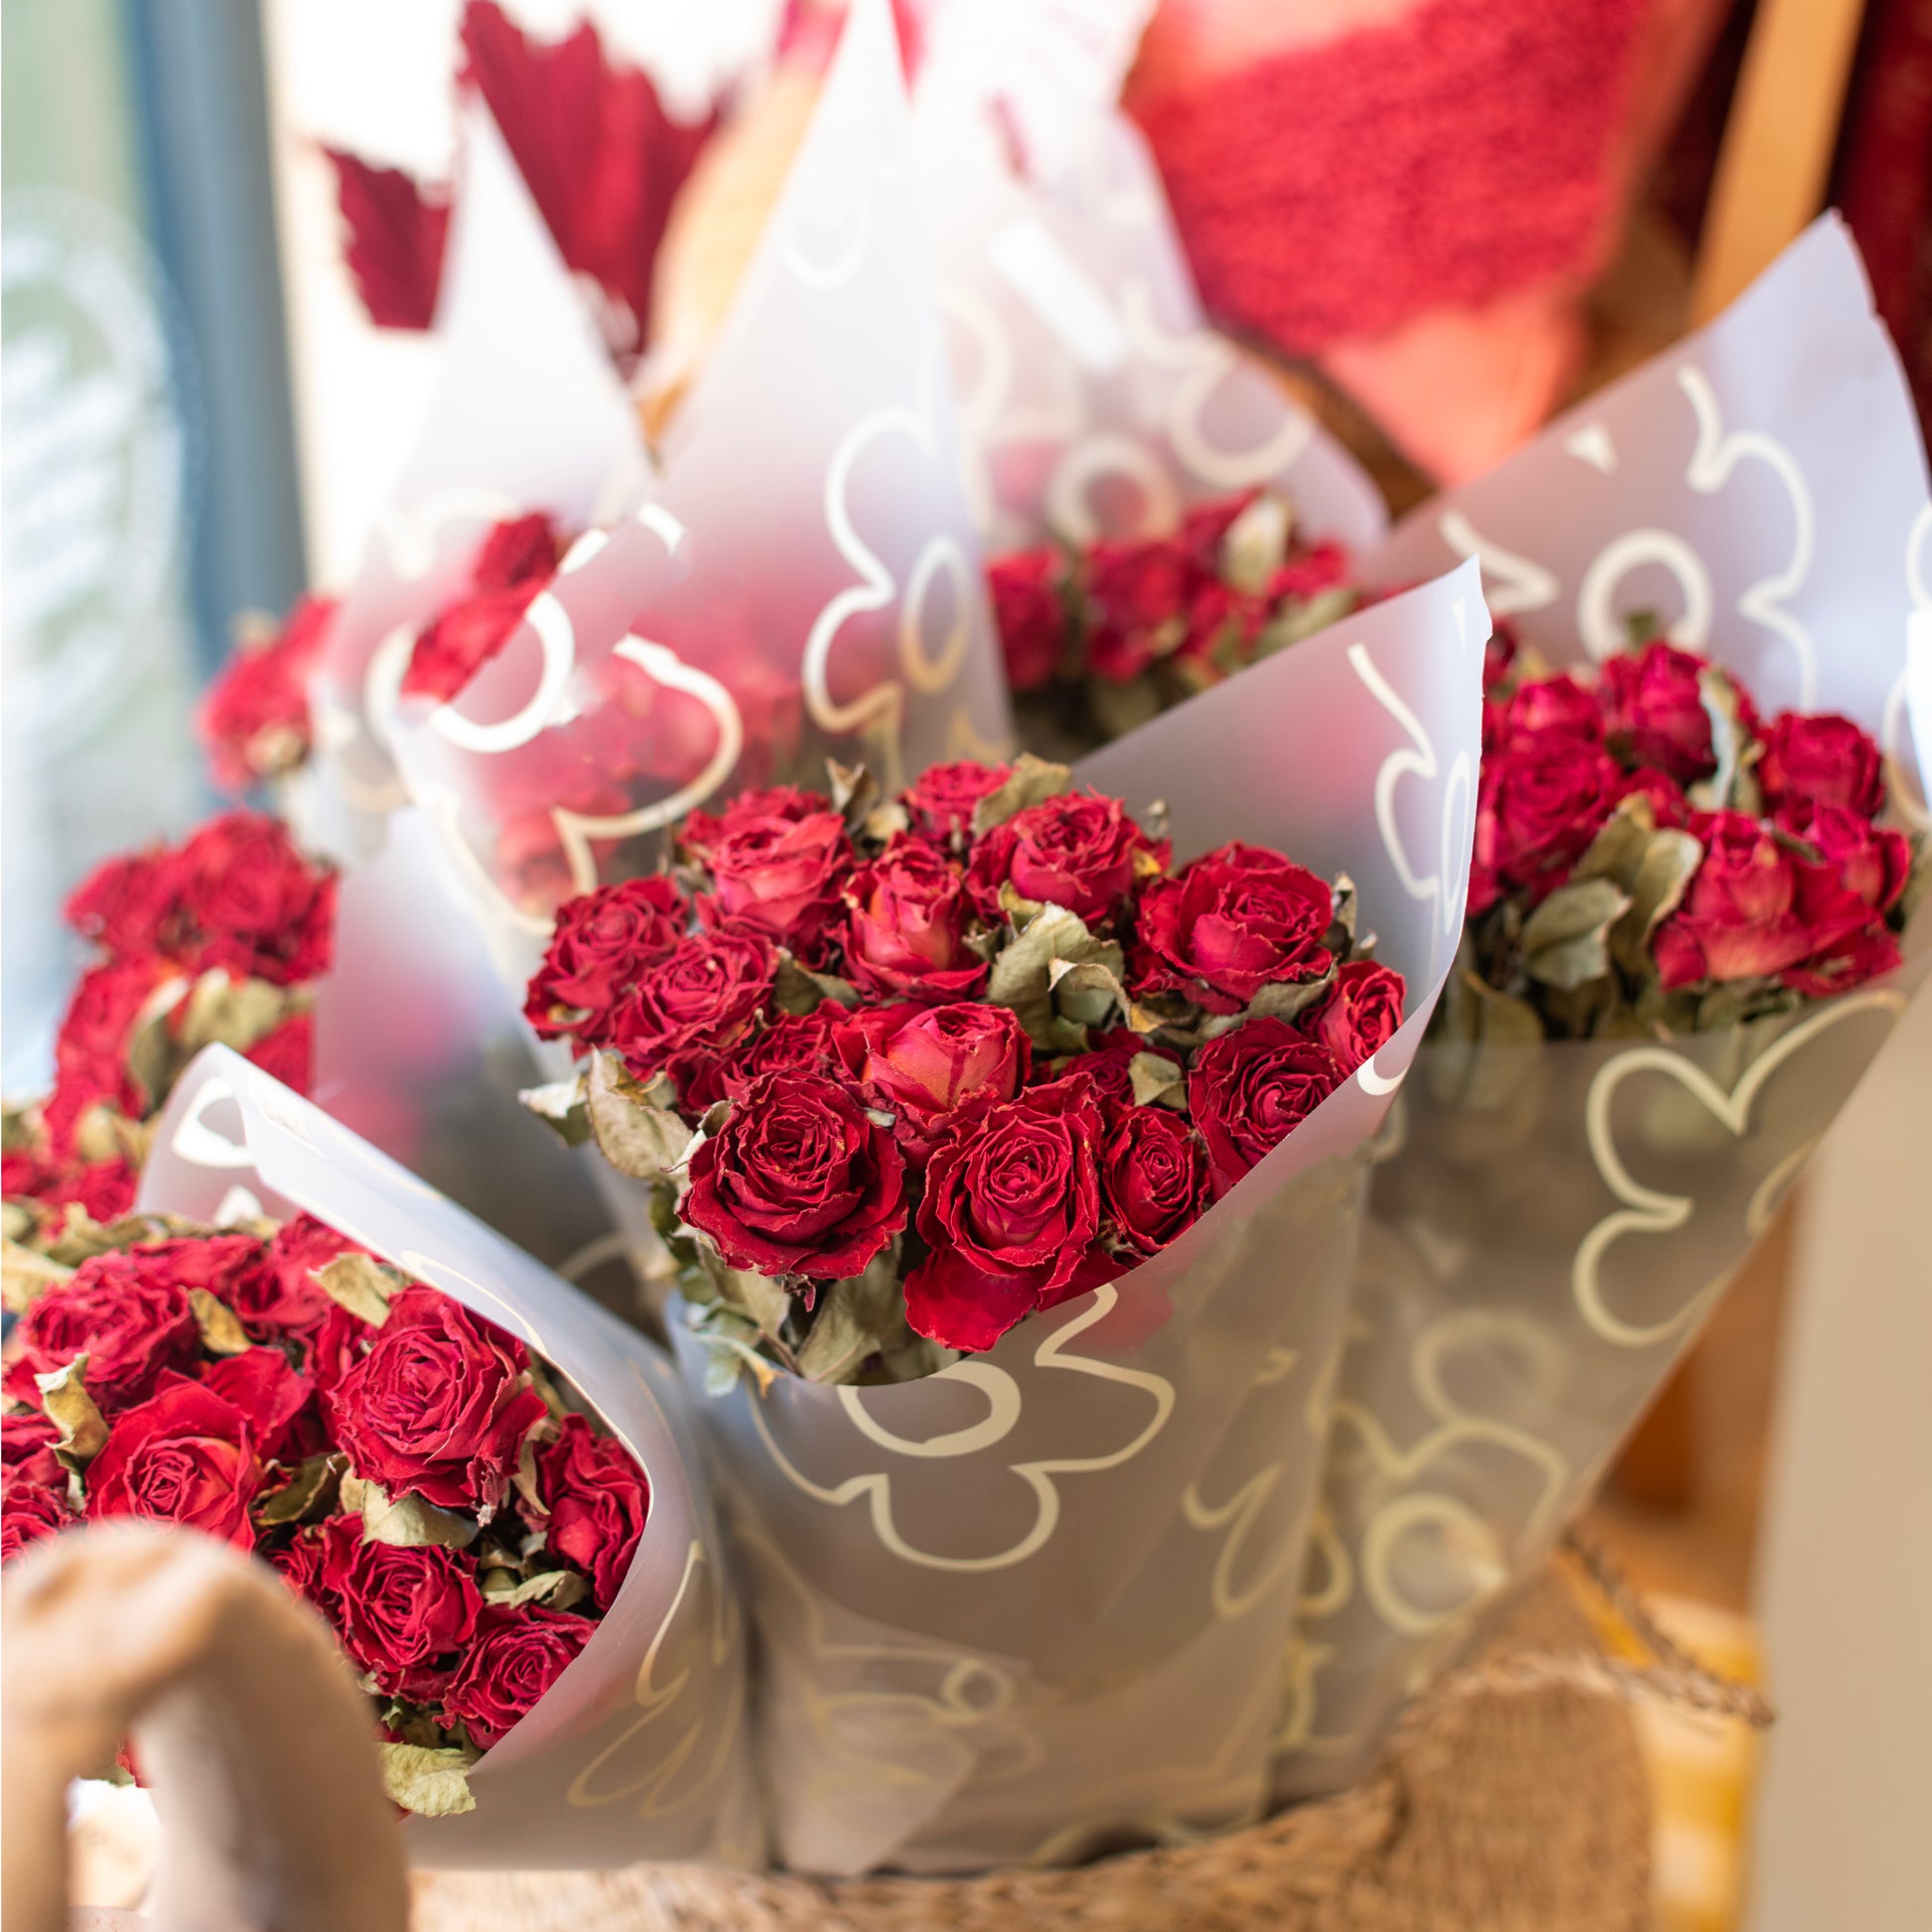 Dried Roses Bouquet, Scarlet - THE BRISTOL ARTISAN